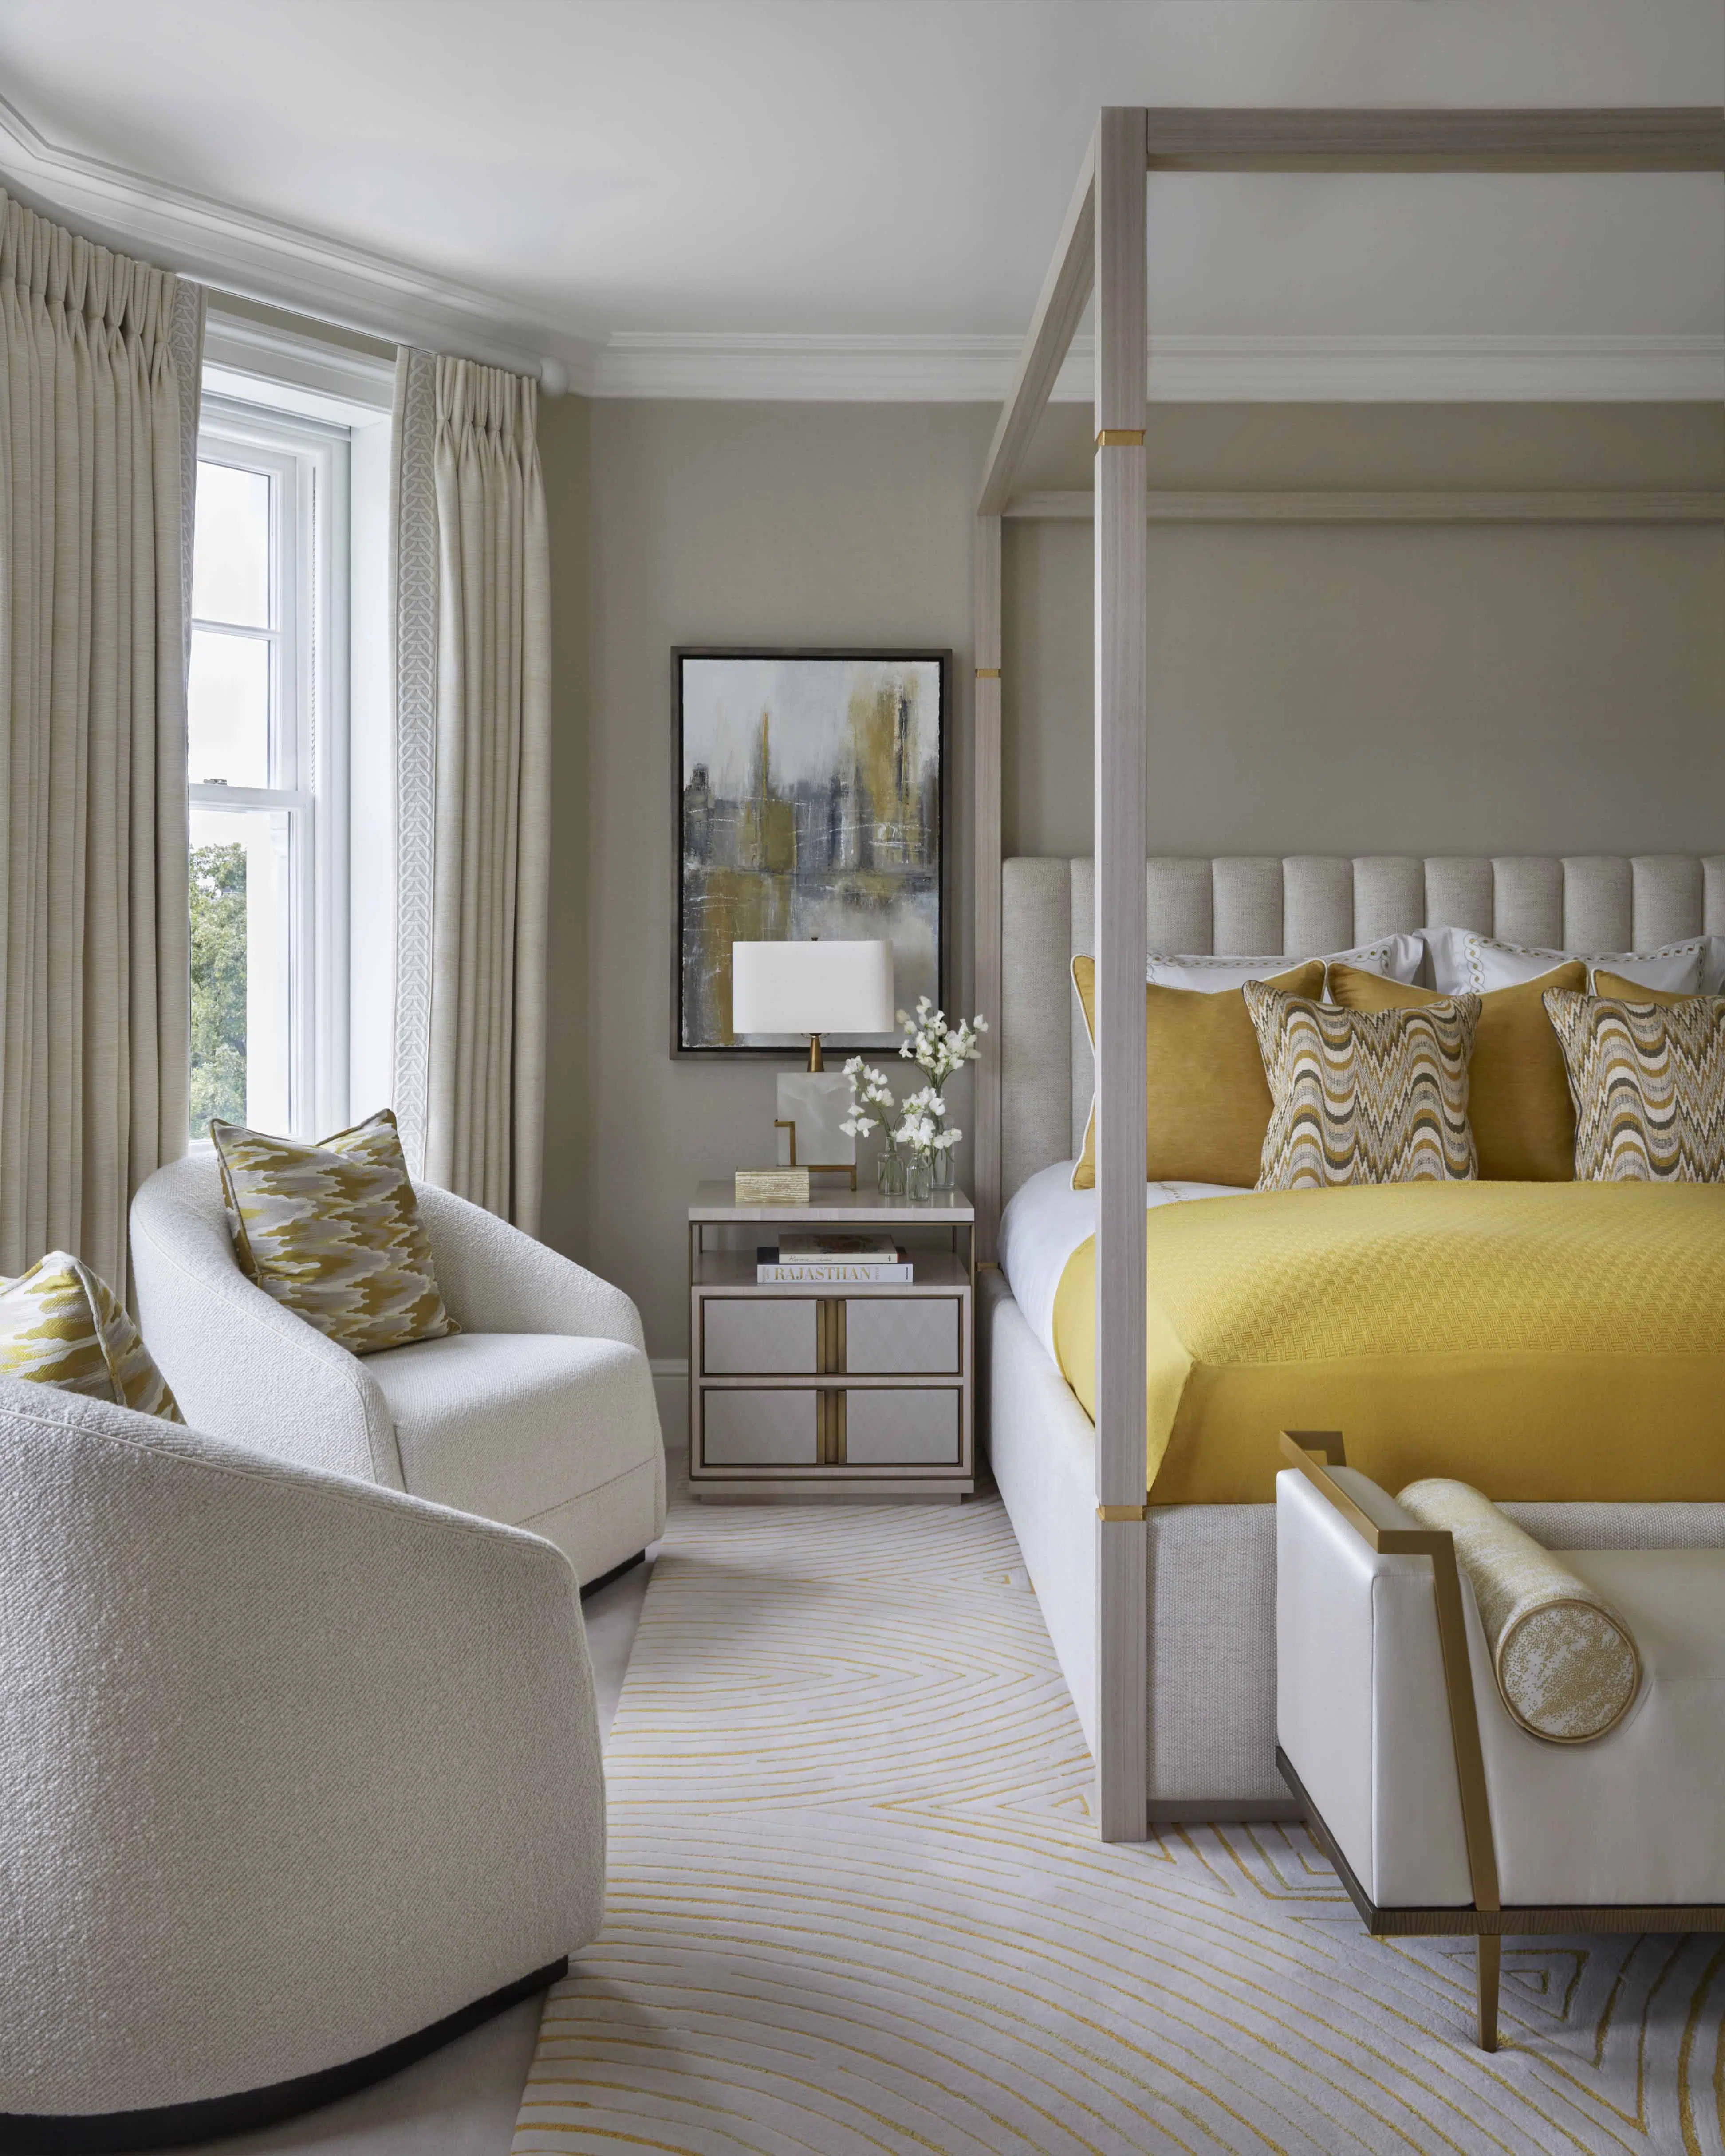 How to design a guest bedroom